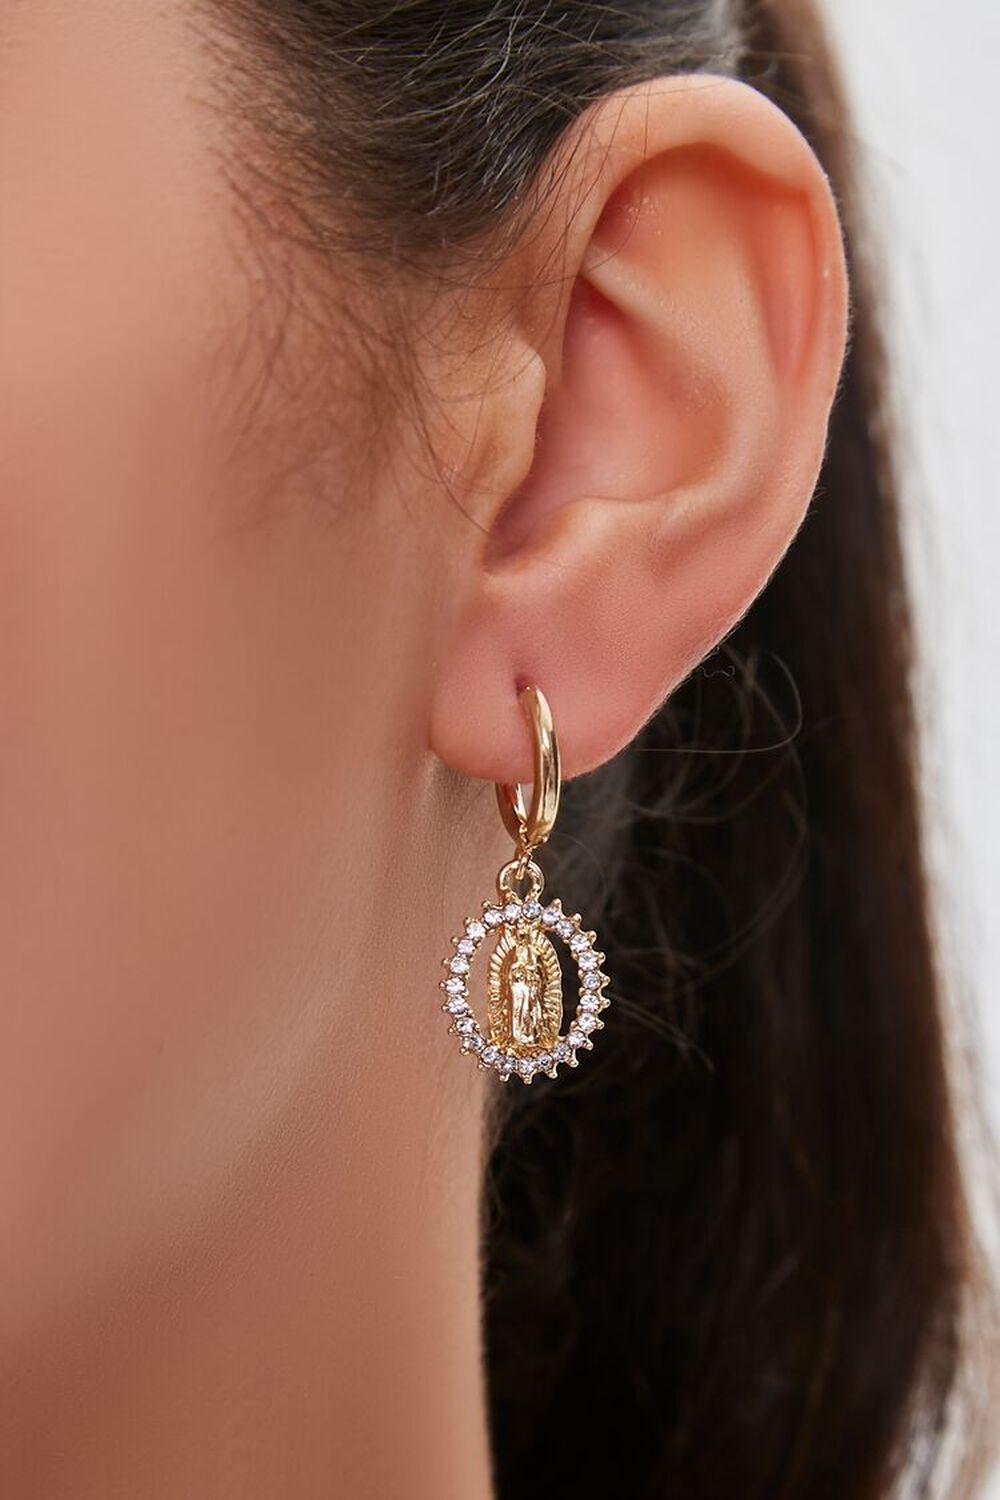 GOLD/CLEAR Our Lady of Guadalupe Pendant Drop Earrings, image 1